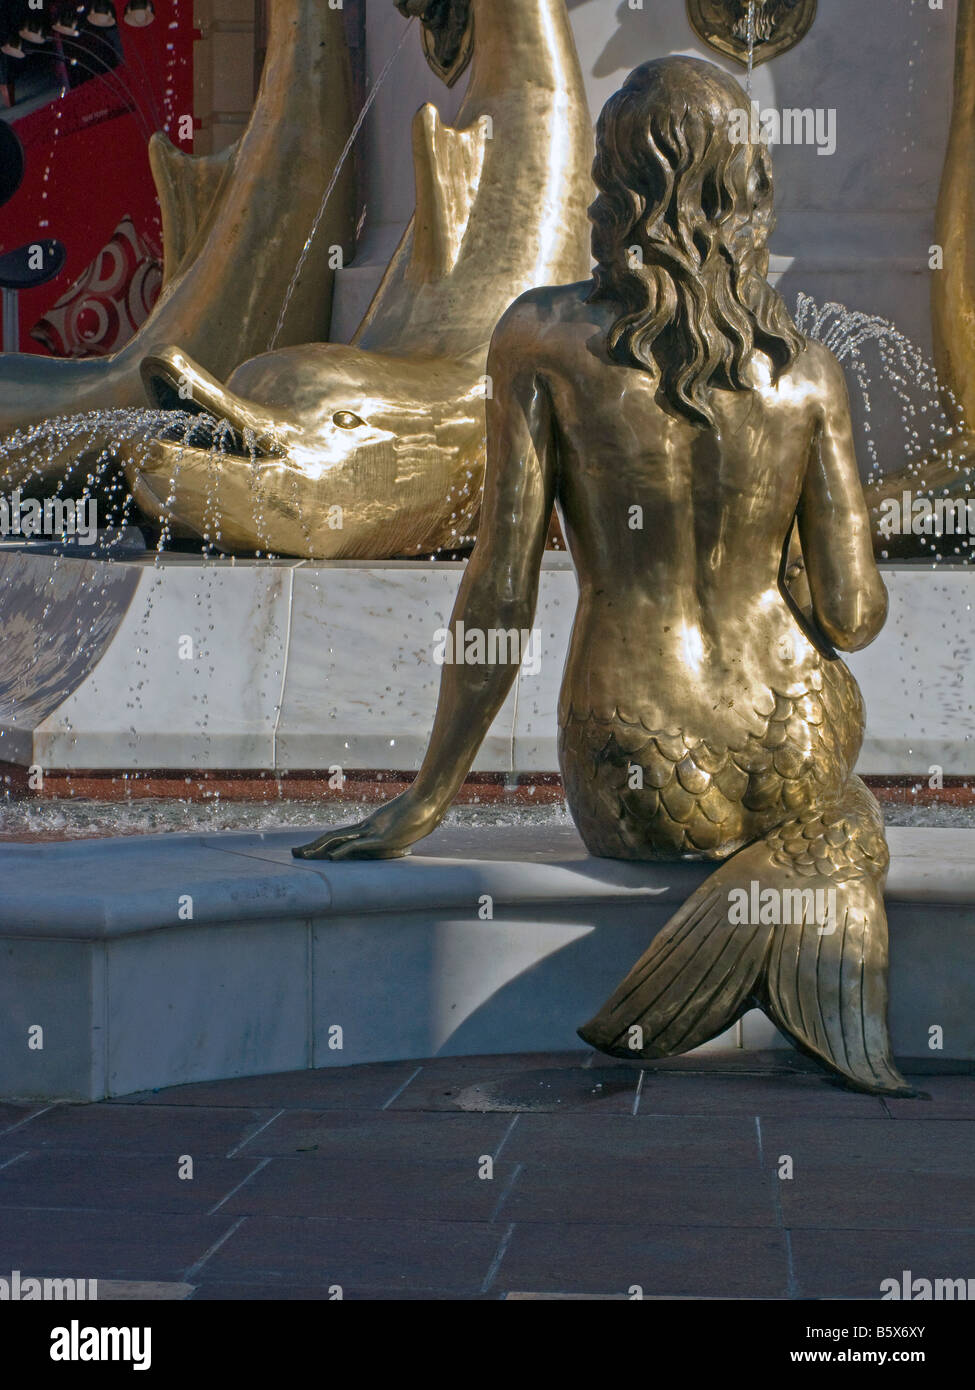 Mermaid & dolphin in Barton Square shopping centre water fountain feature, part of Trafford Park shopping complex, Manchester Stock Photo